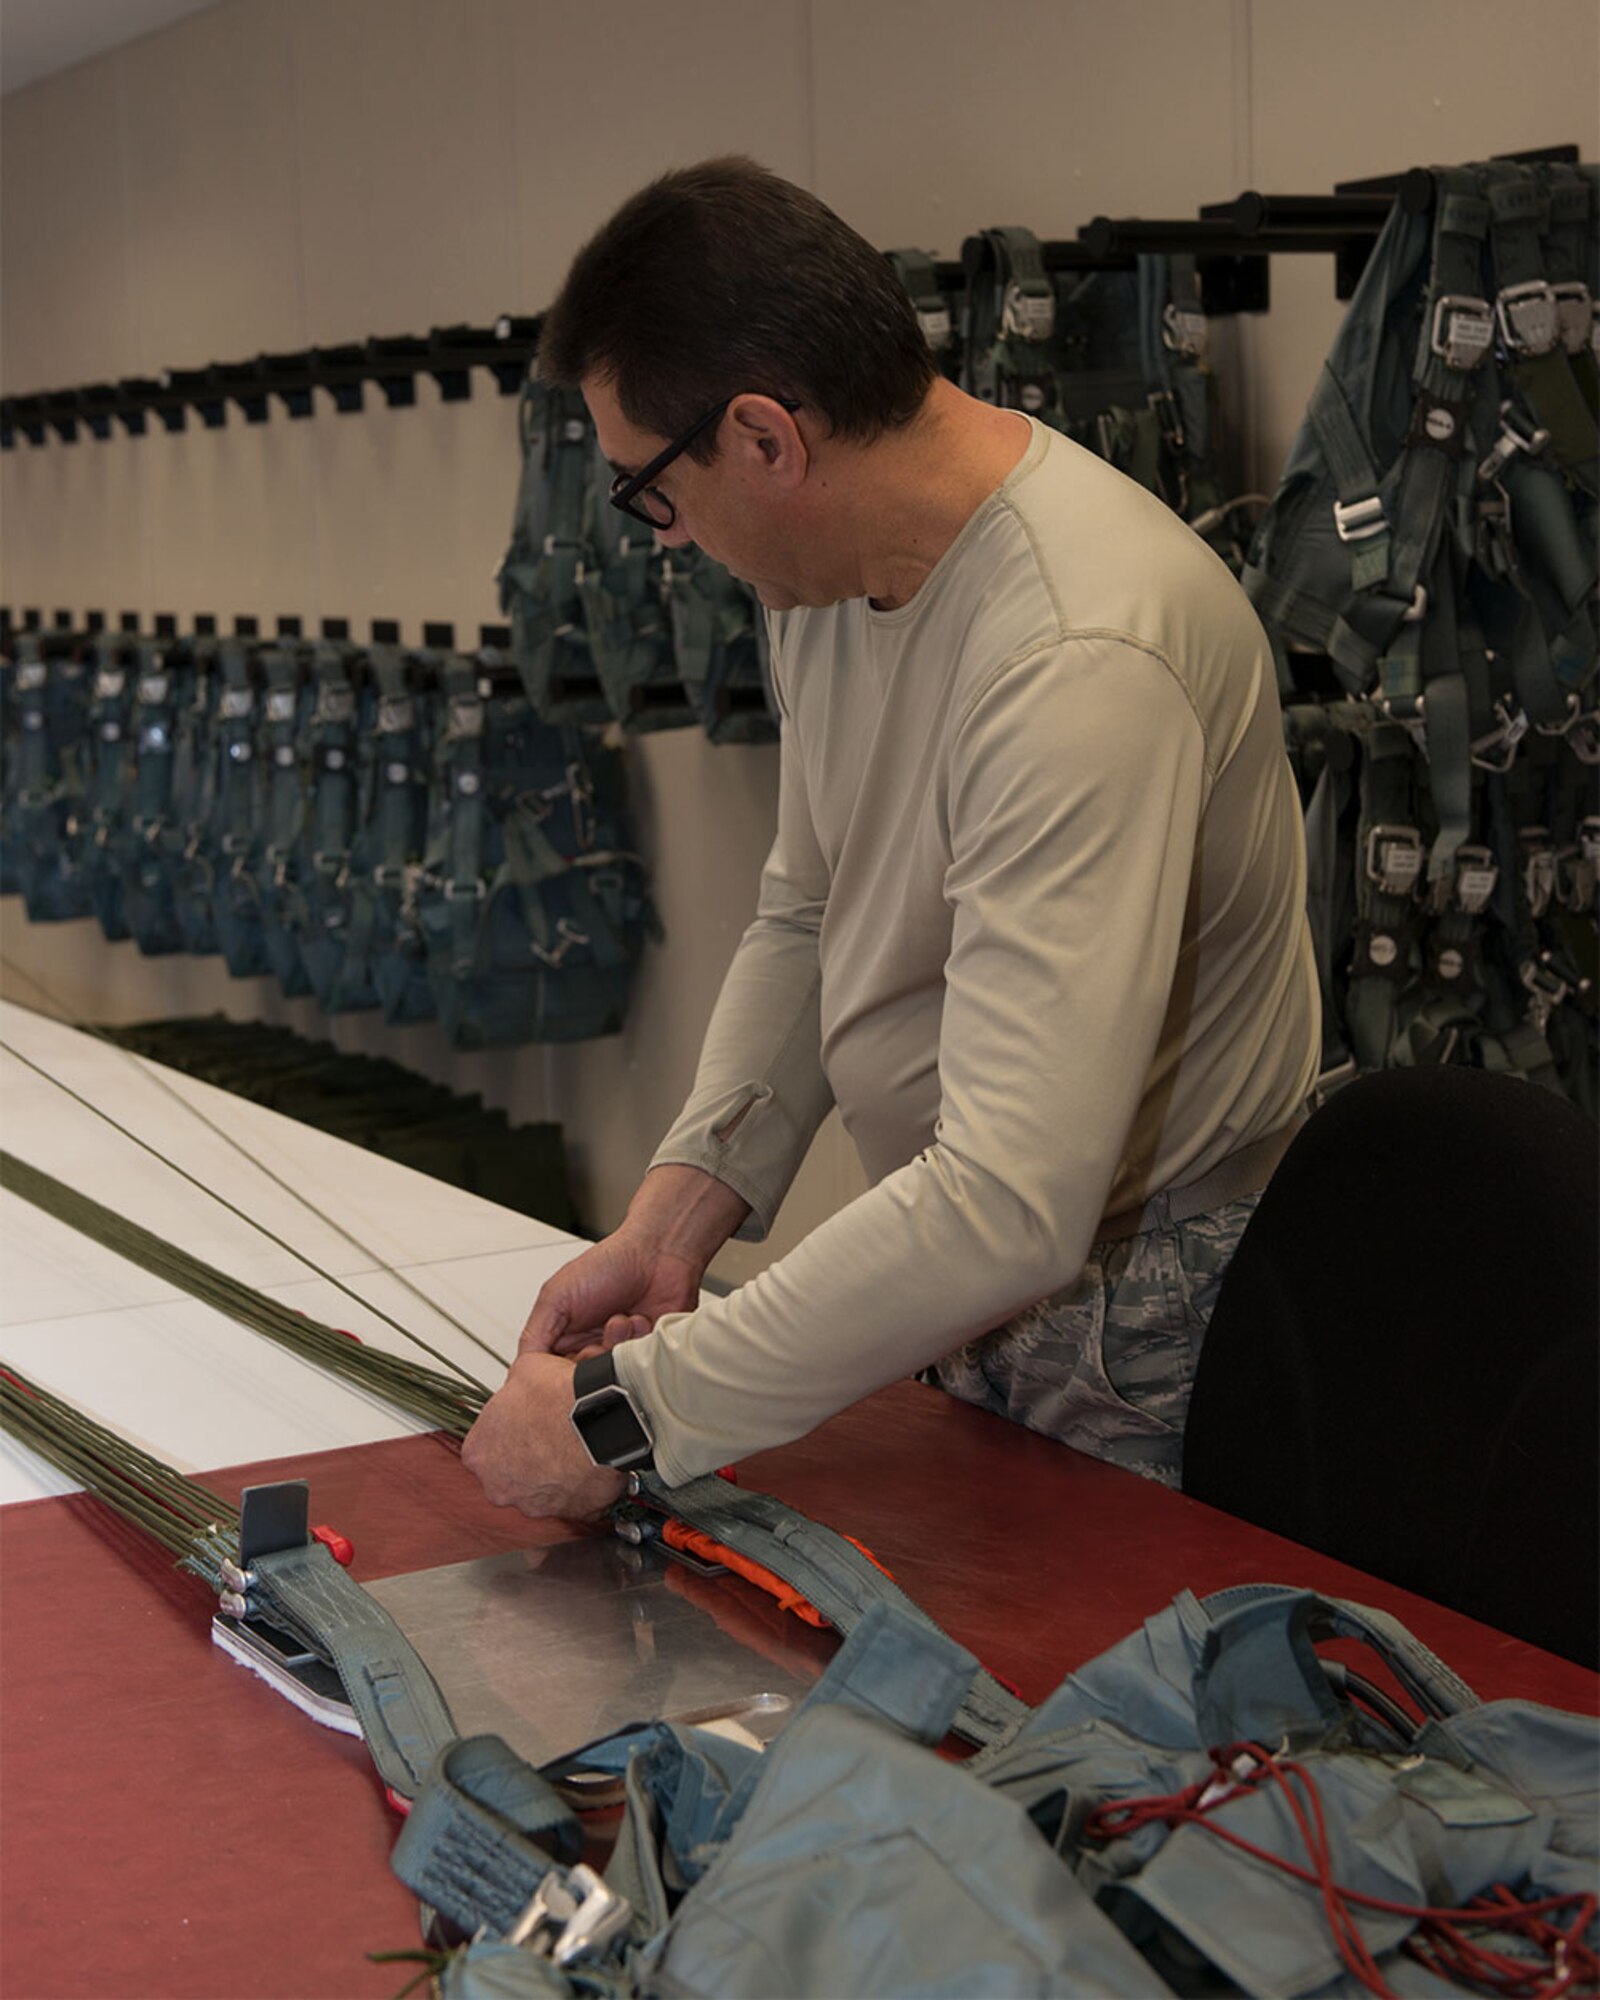 Master Sgt. Raymond Rosado counts parachute lines to ensure the lines are not tangled or frayed 1 Feb 2018 at Bradley Aire National Guard Base, East Granby, Conn. One of Rosado’s duties include inspecting survival equipment, like parachutes, for any deficiencies. (U.S. Air National Guard photo by 1st Lt. Jen Pierce/released)